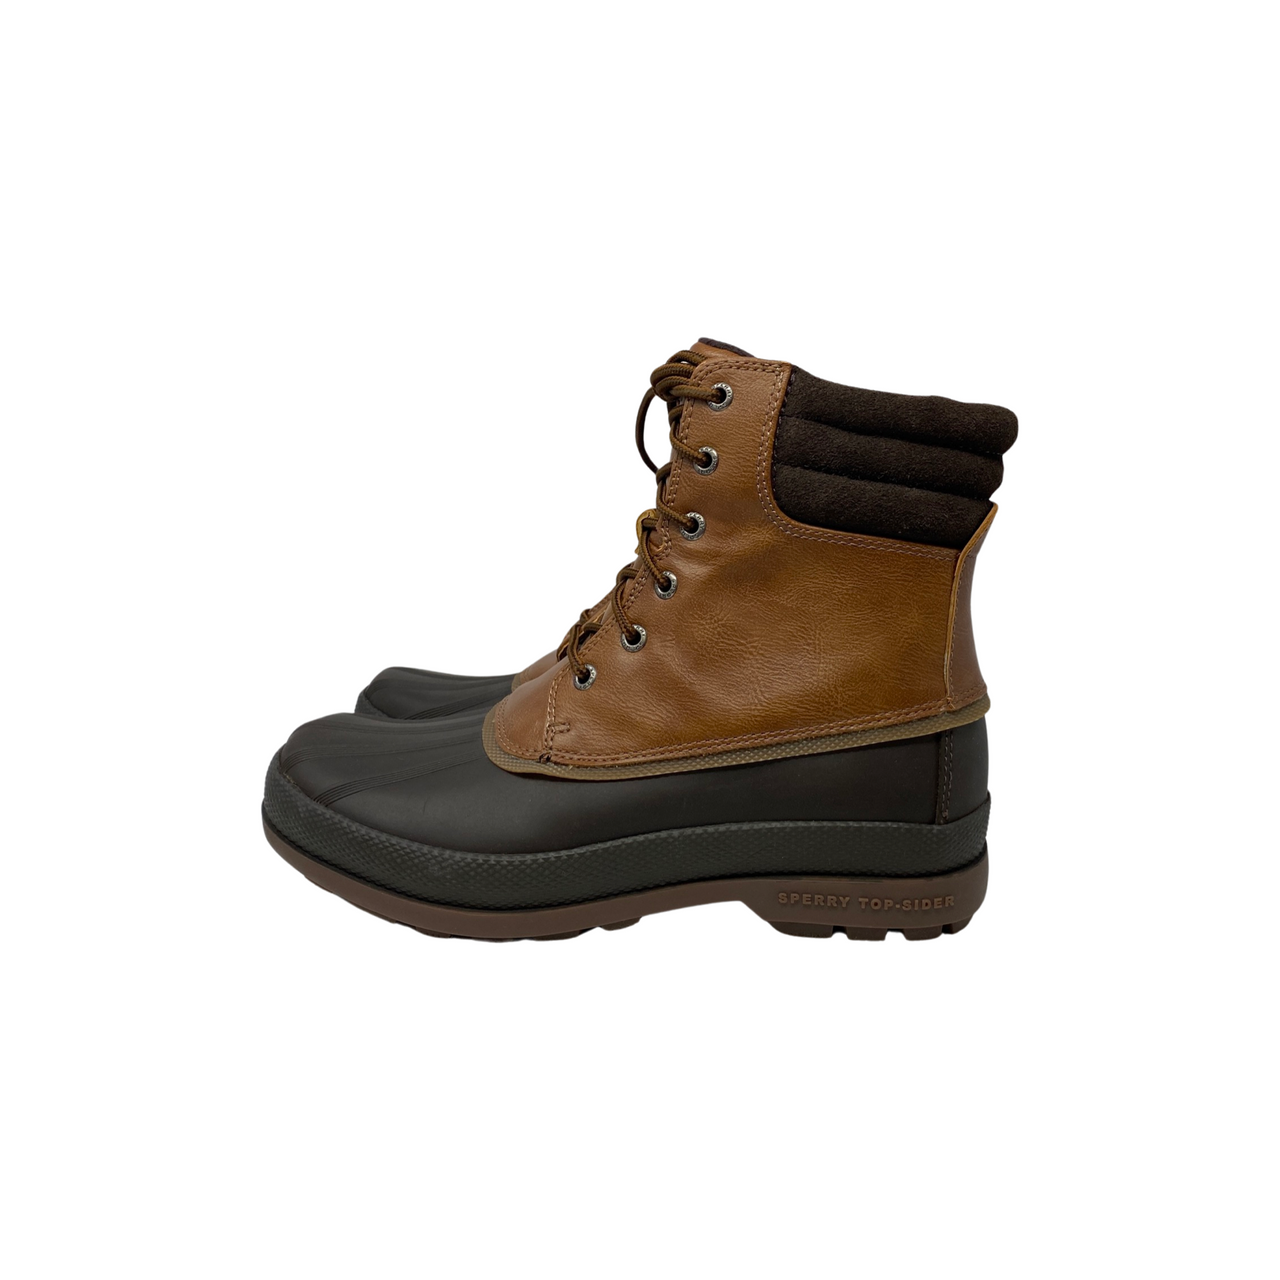 Sperry Cold Bay Boots-Side